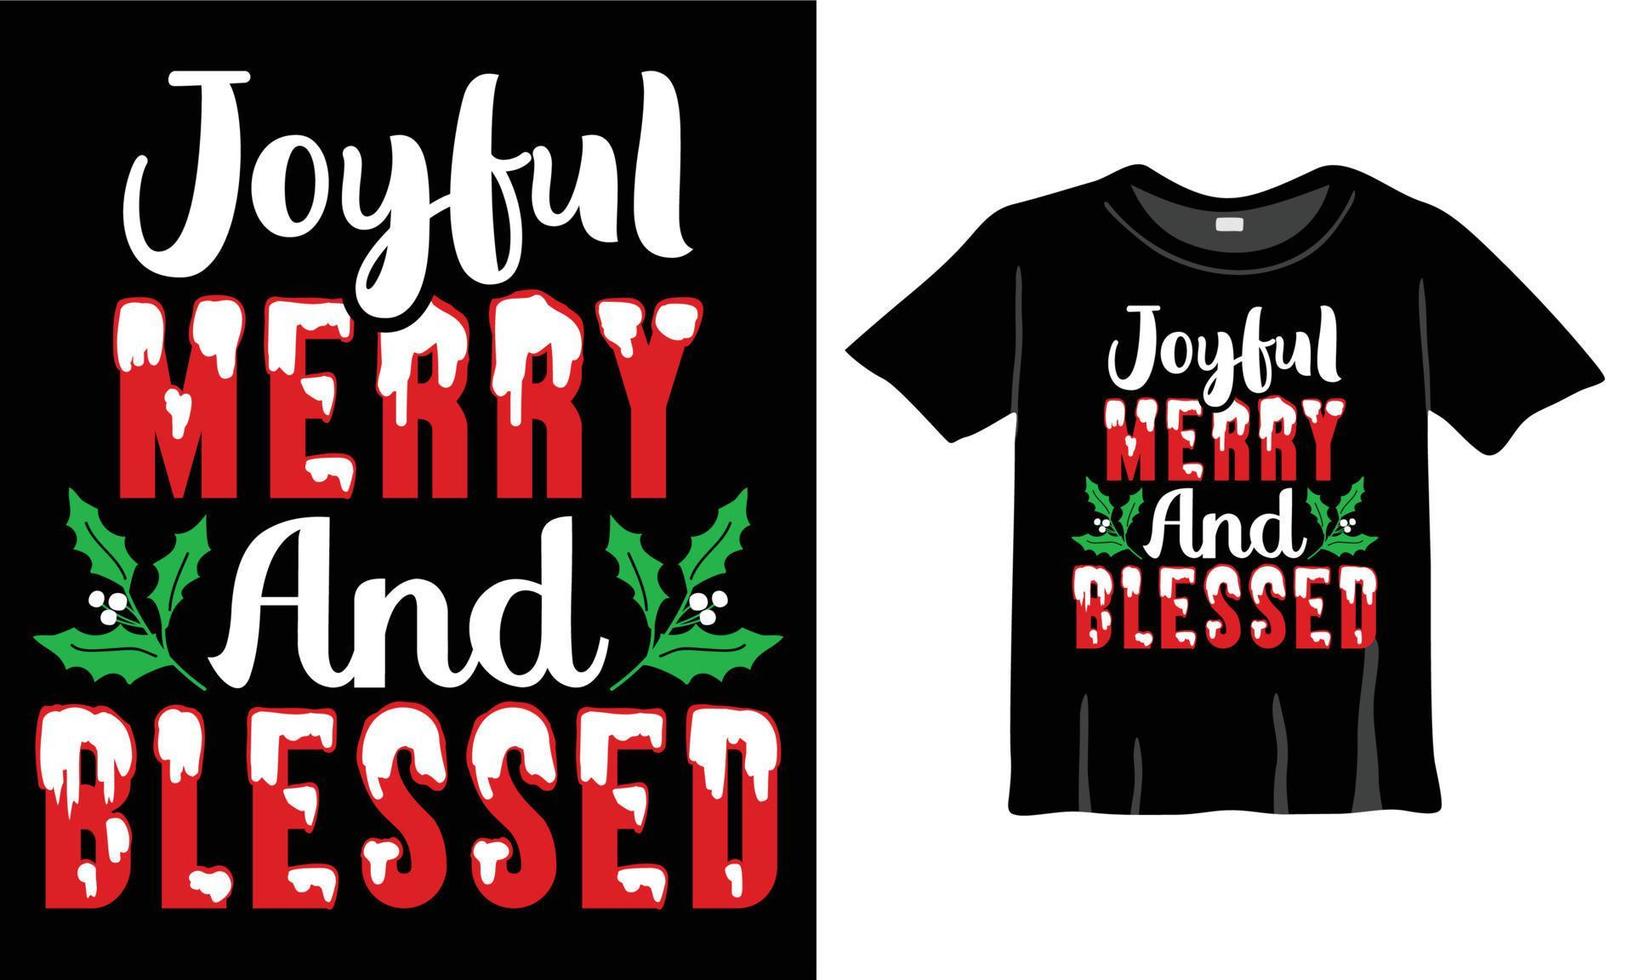 Joyful Merry and Blessed Christmas T-Shirt Design Template for Christmas Celebration. Good for Greeting cards, t-shirts, mugs, and gifts. For Men, Women, and Baby clothing vector